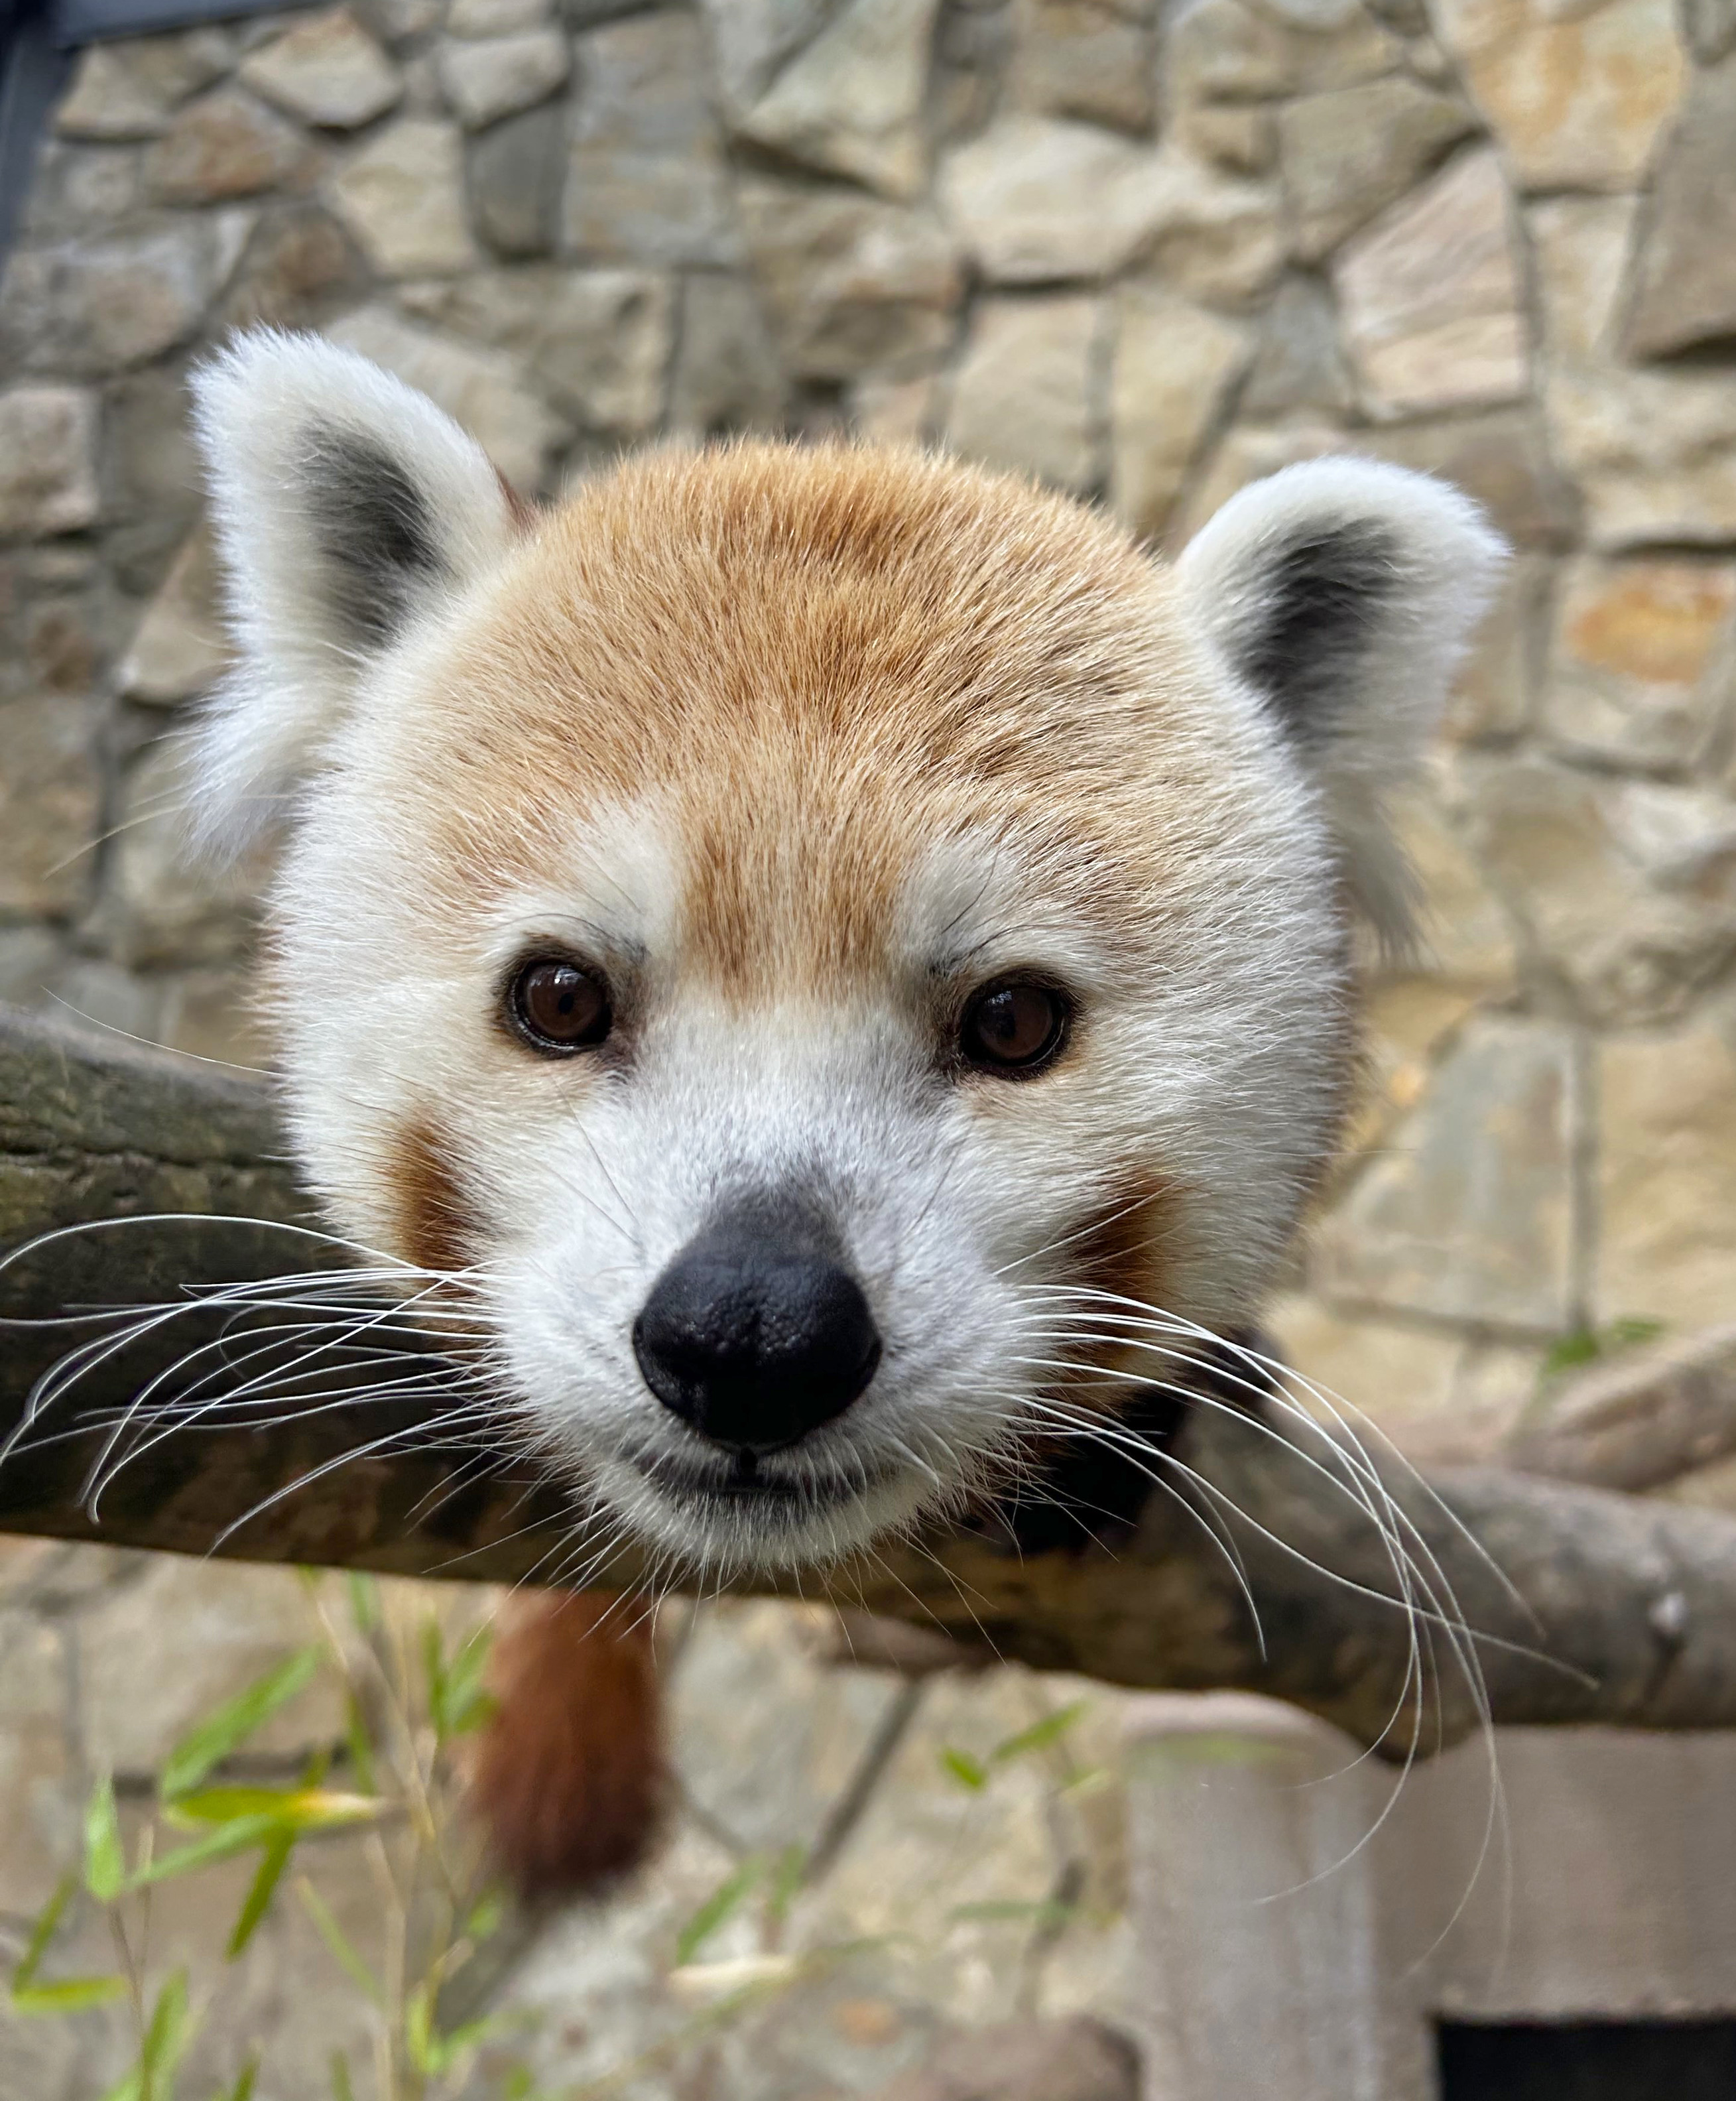 Closeup of a male Himalayan red panda leaning forward into the camera while sitting on a branch in an outdoor zoo habitat.